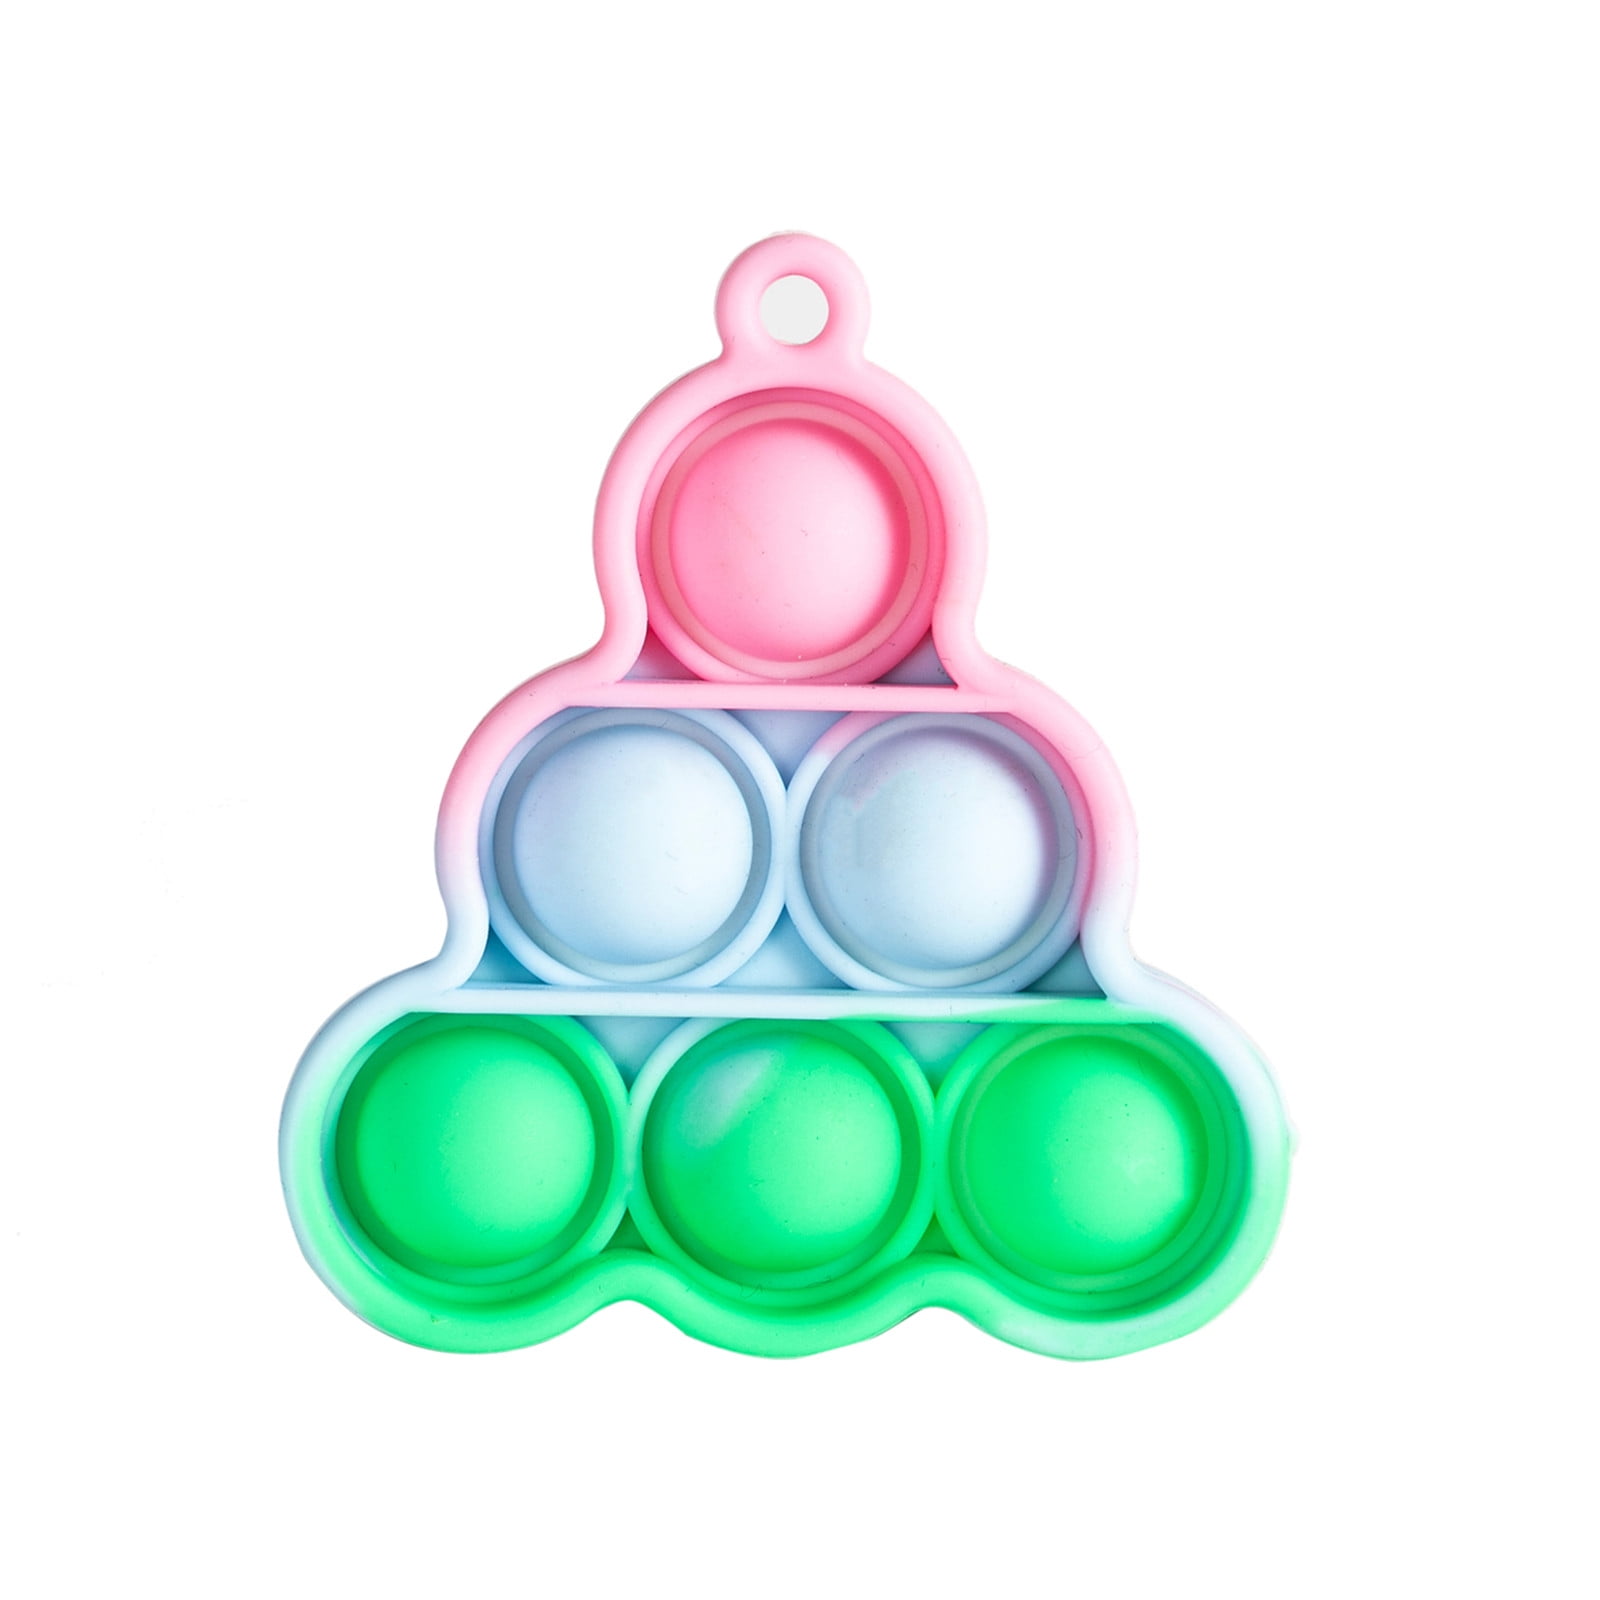 Details about   1/4pcs Squish Sensory stress reliever ball toy autism squeeze anxiety fidget HOT 